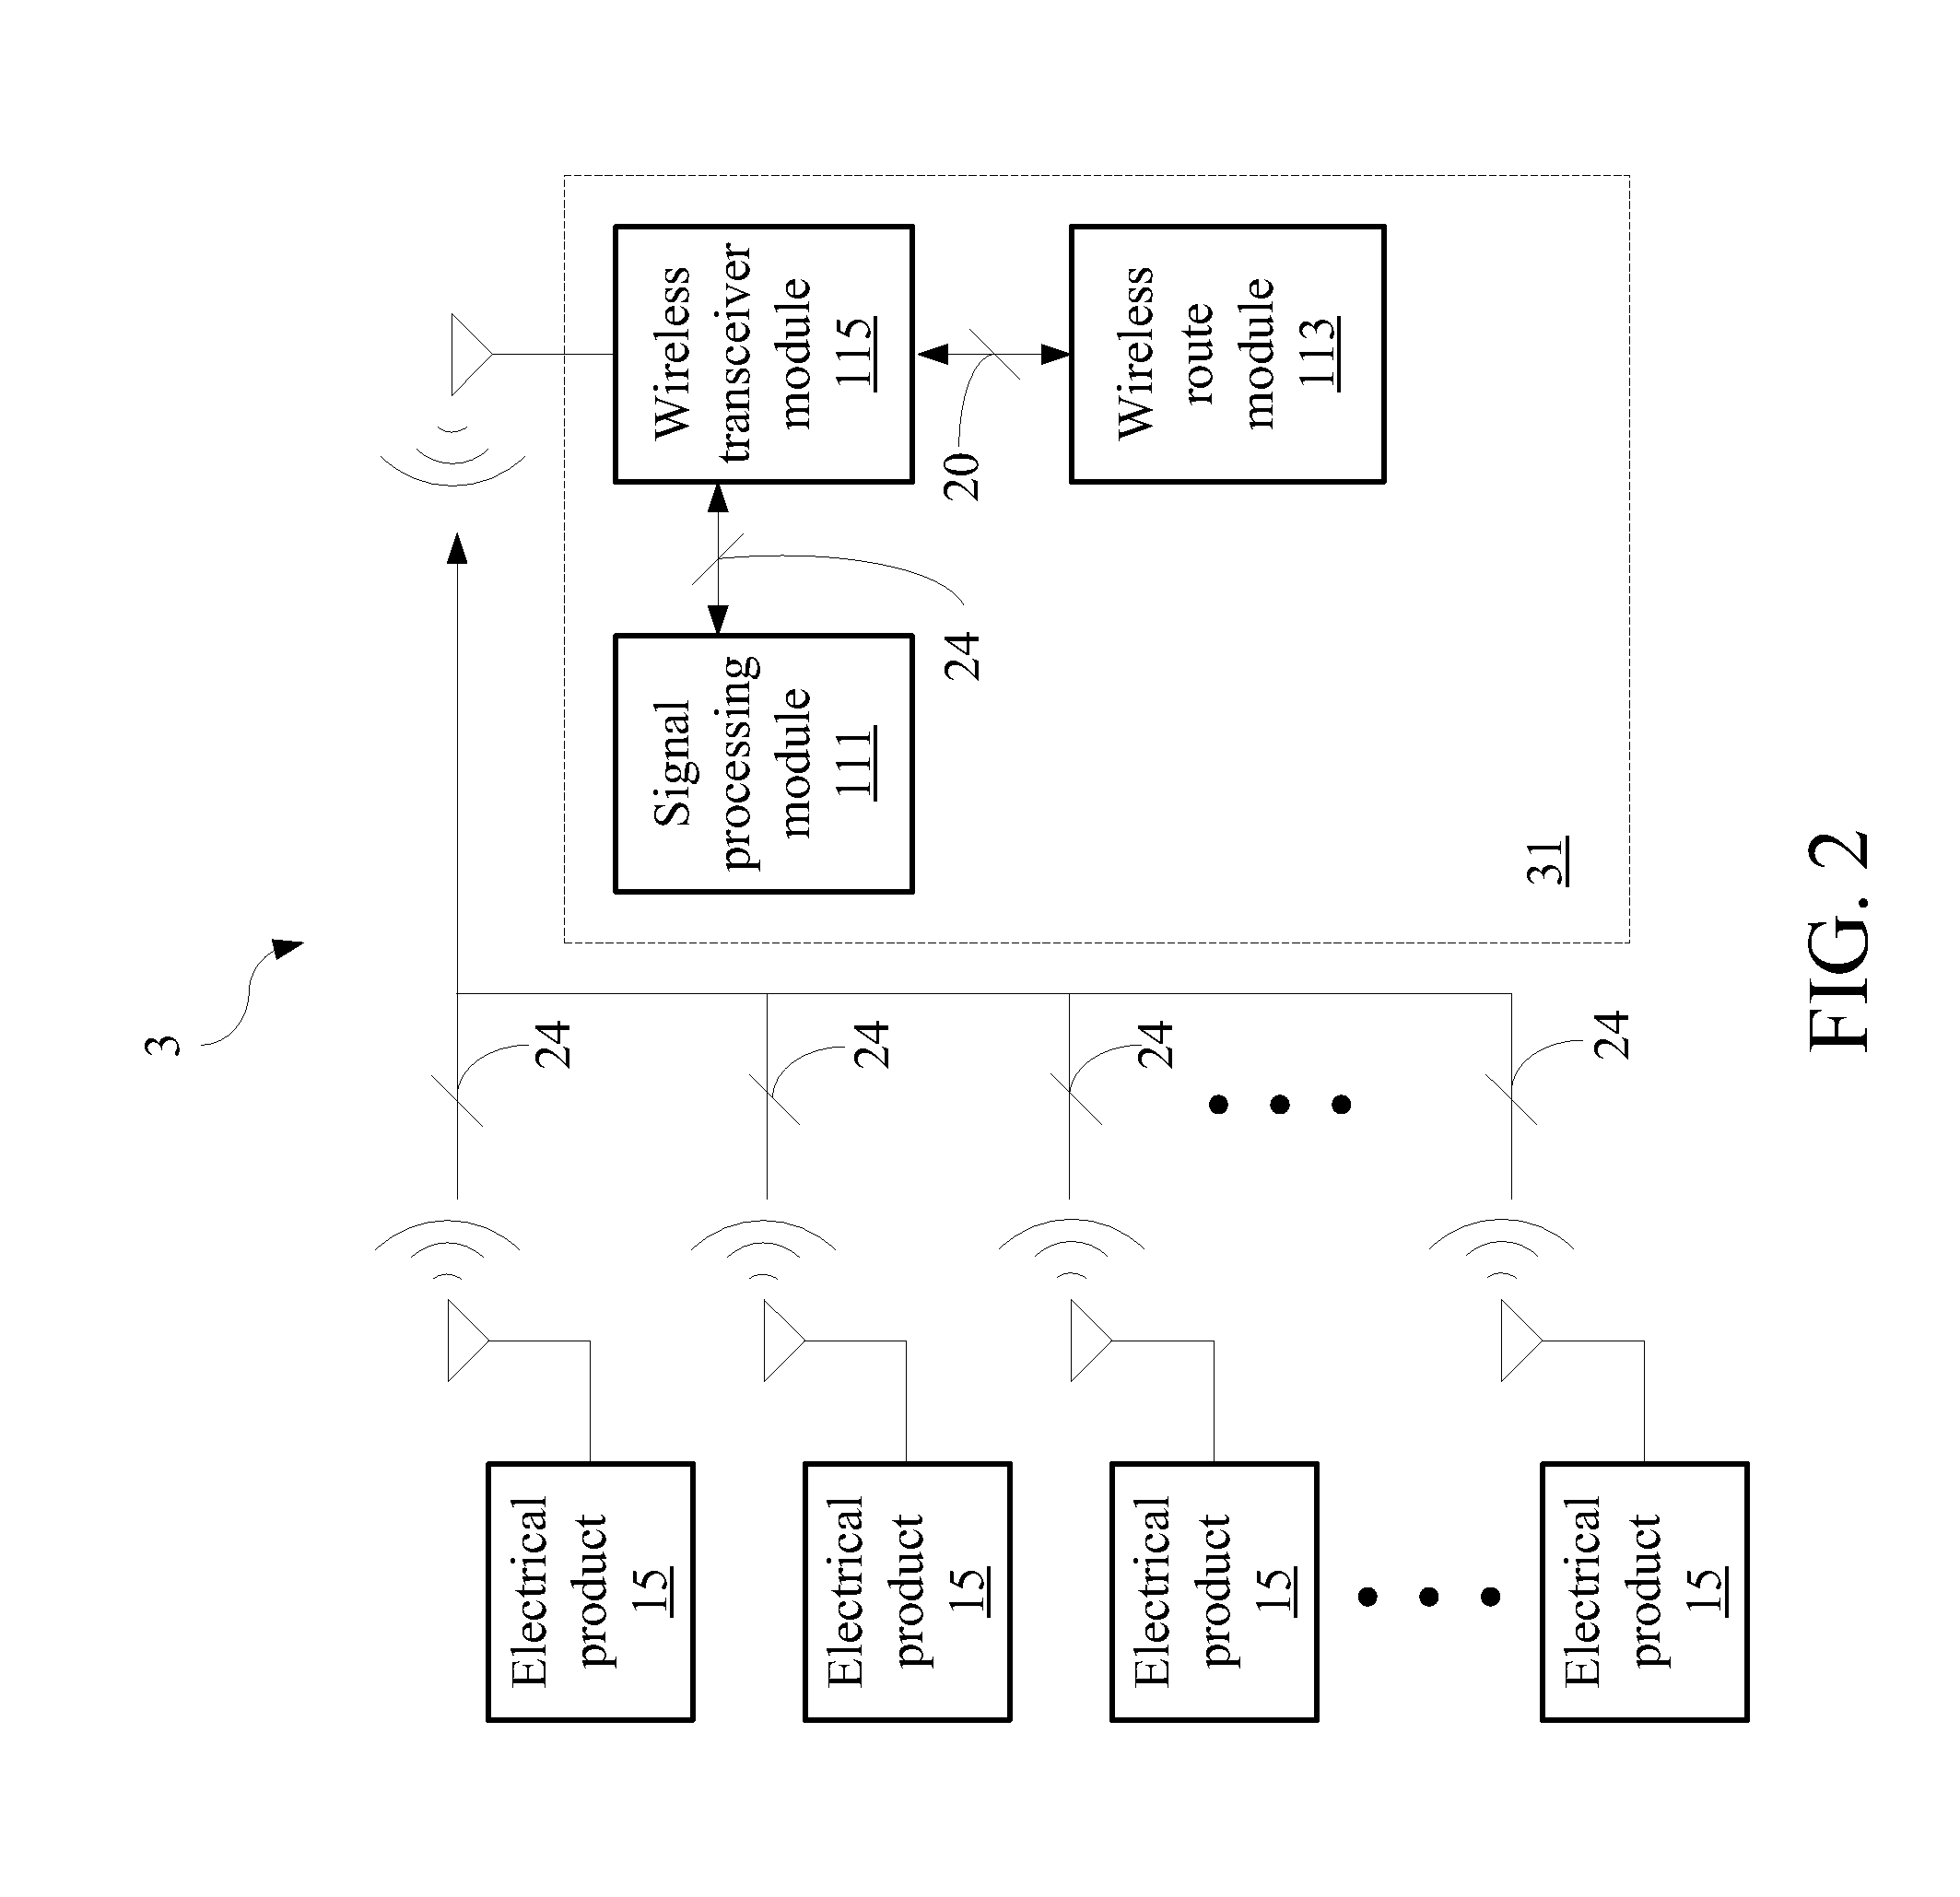 Electrical device having a wireless route function